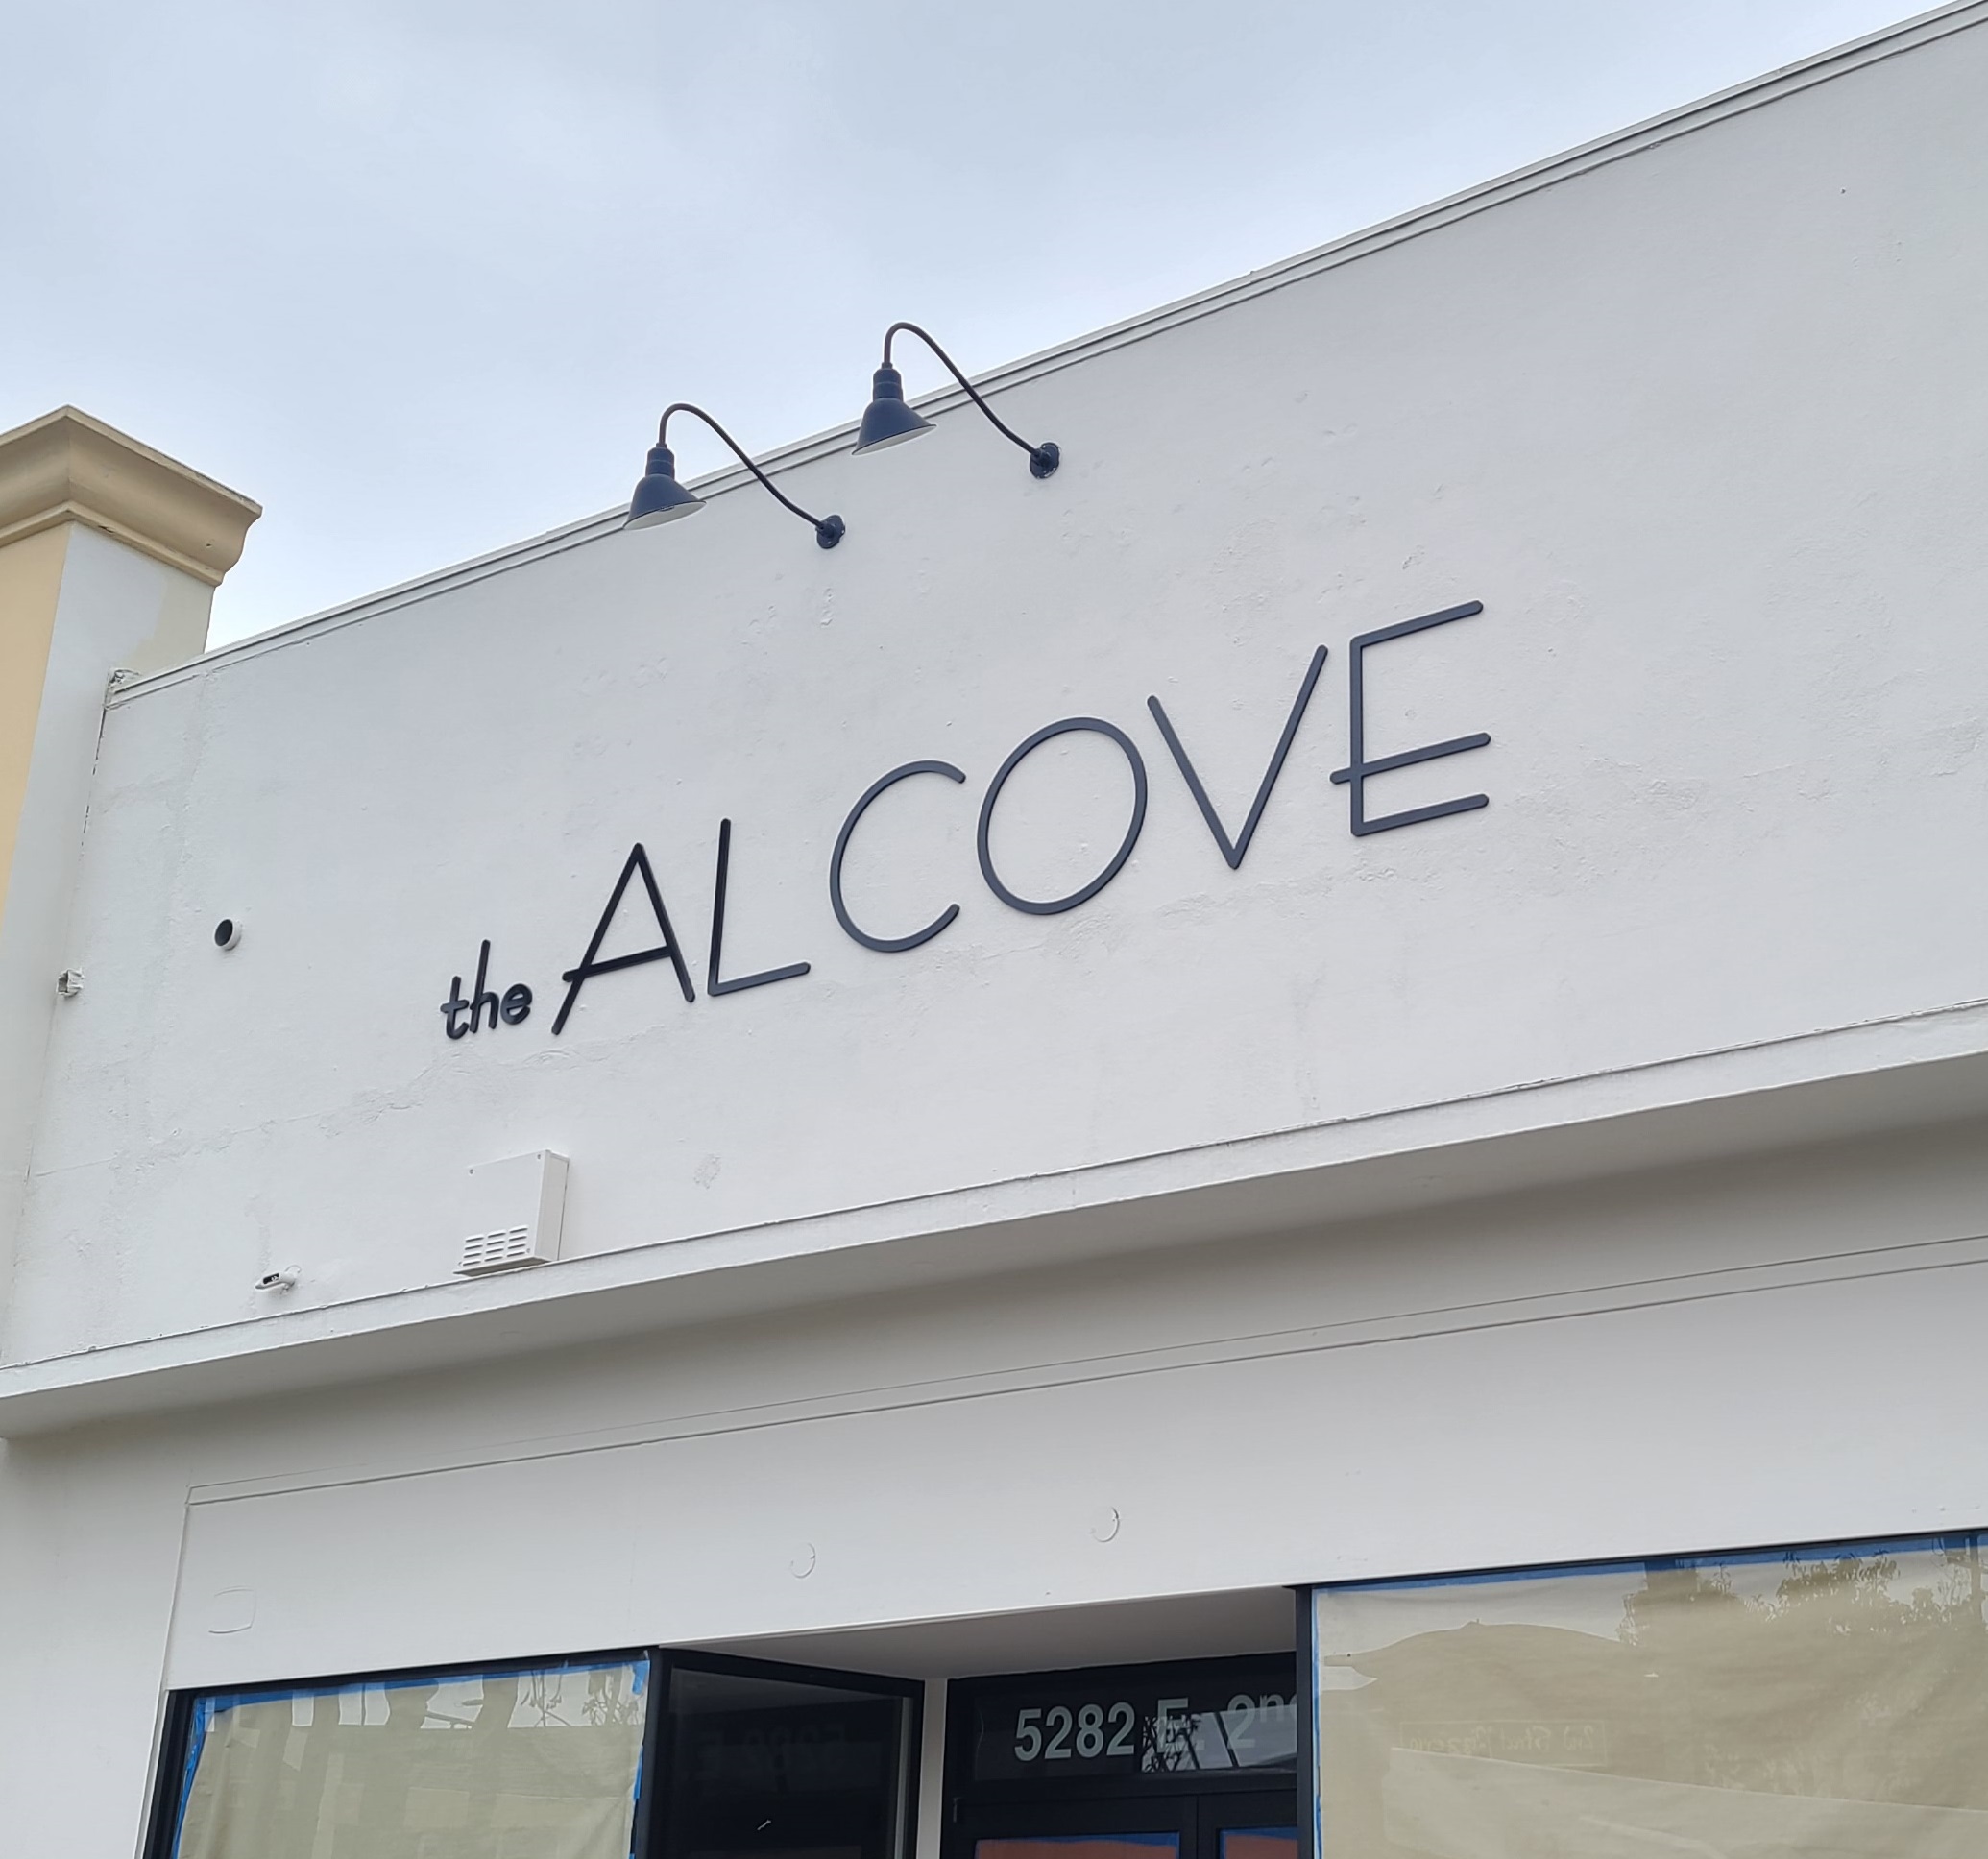 Fashion stores need fitting signage, like this storefront sign for our friends at The Alcove's new branch.